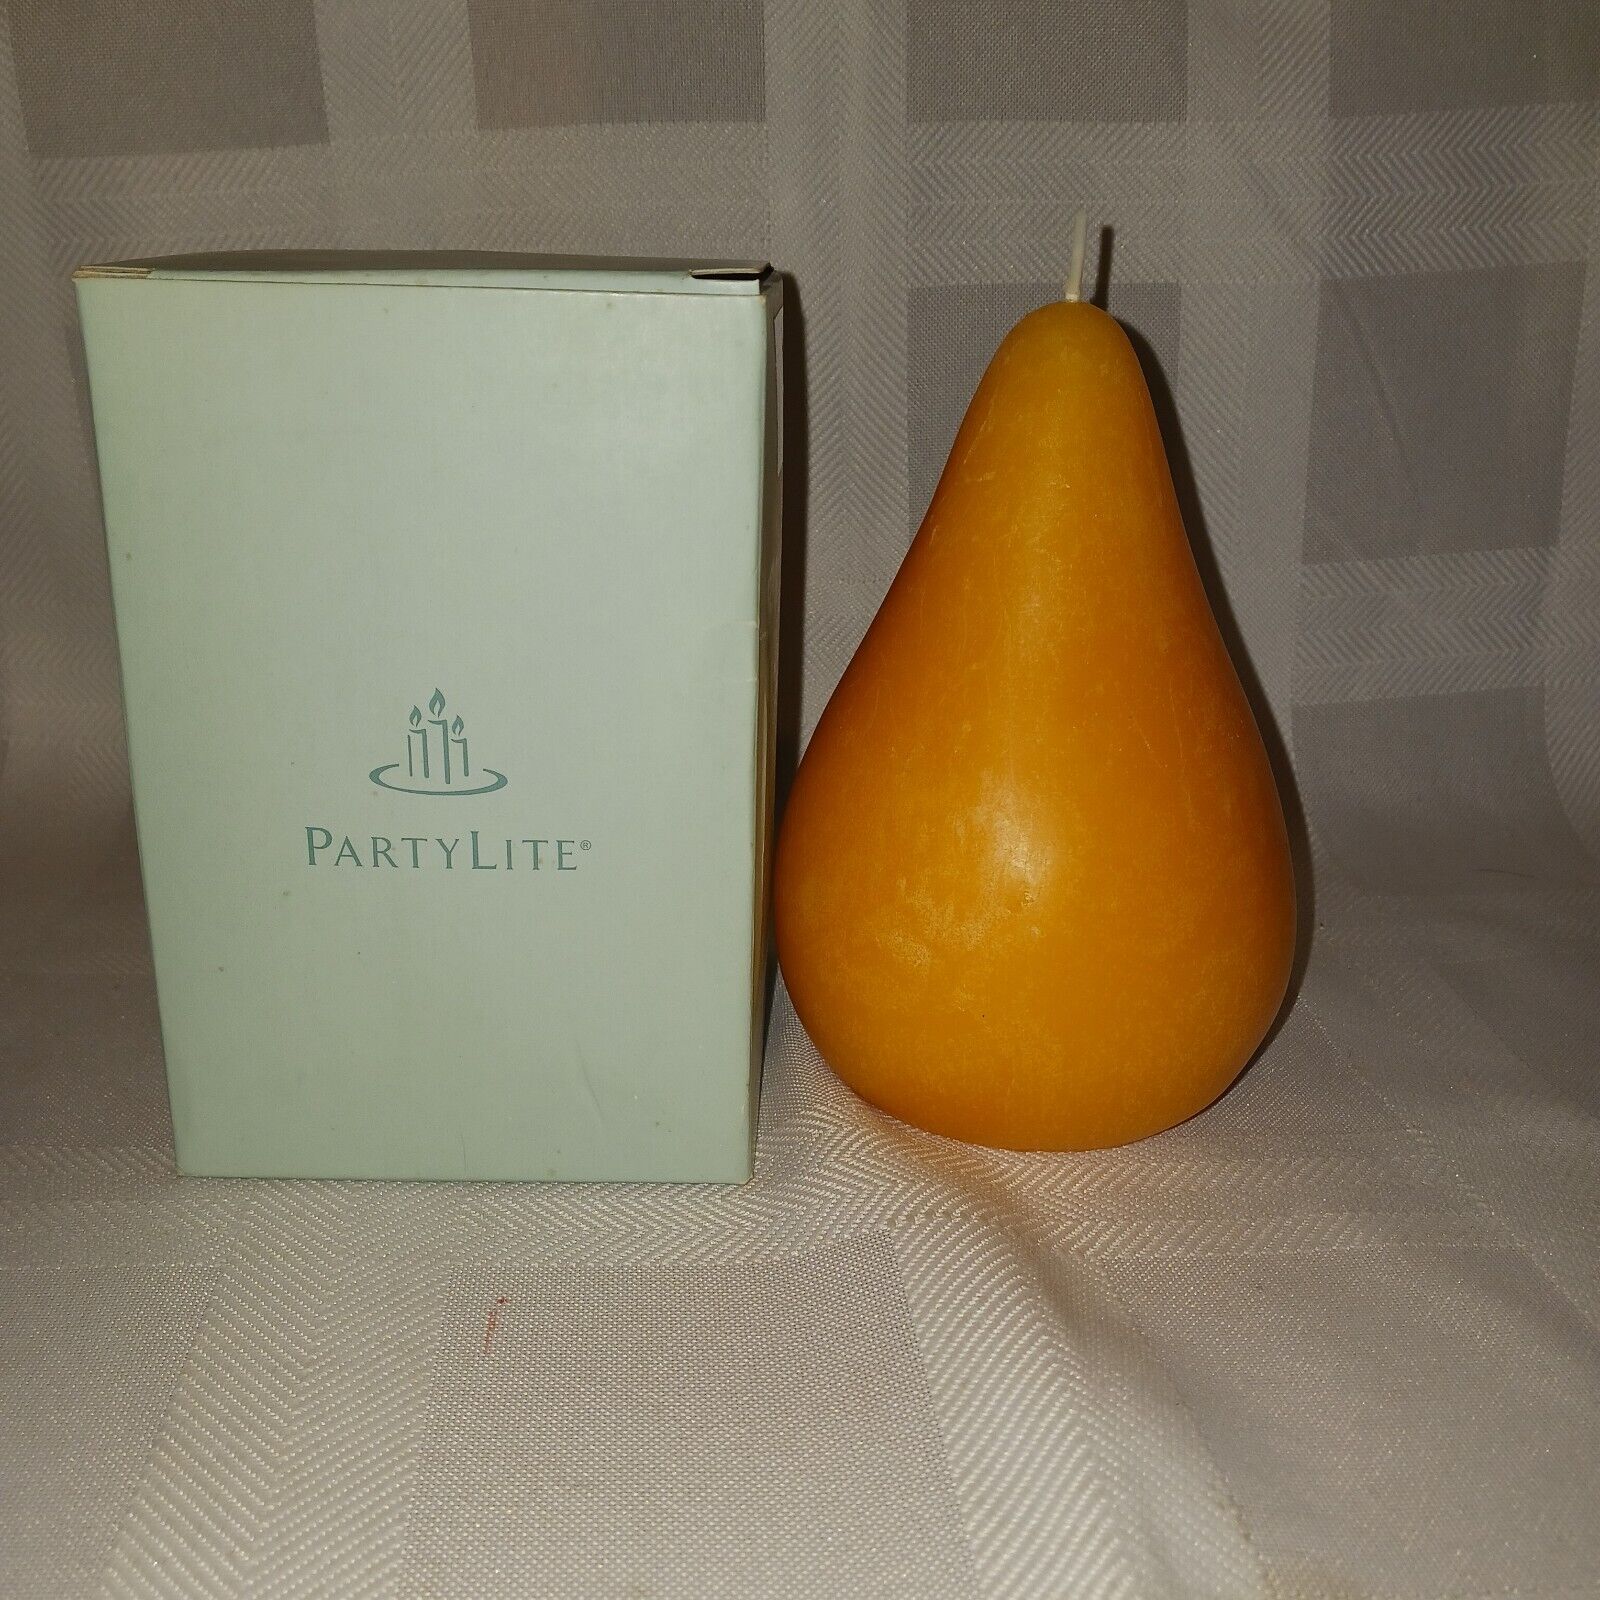 Partylite Retired Pear & Quince Pear Shaped Candle WA528